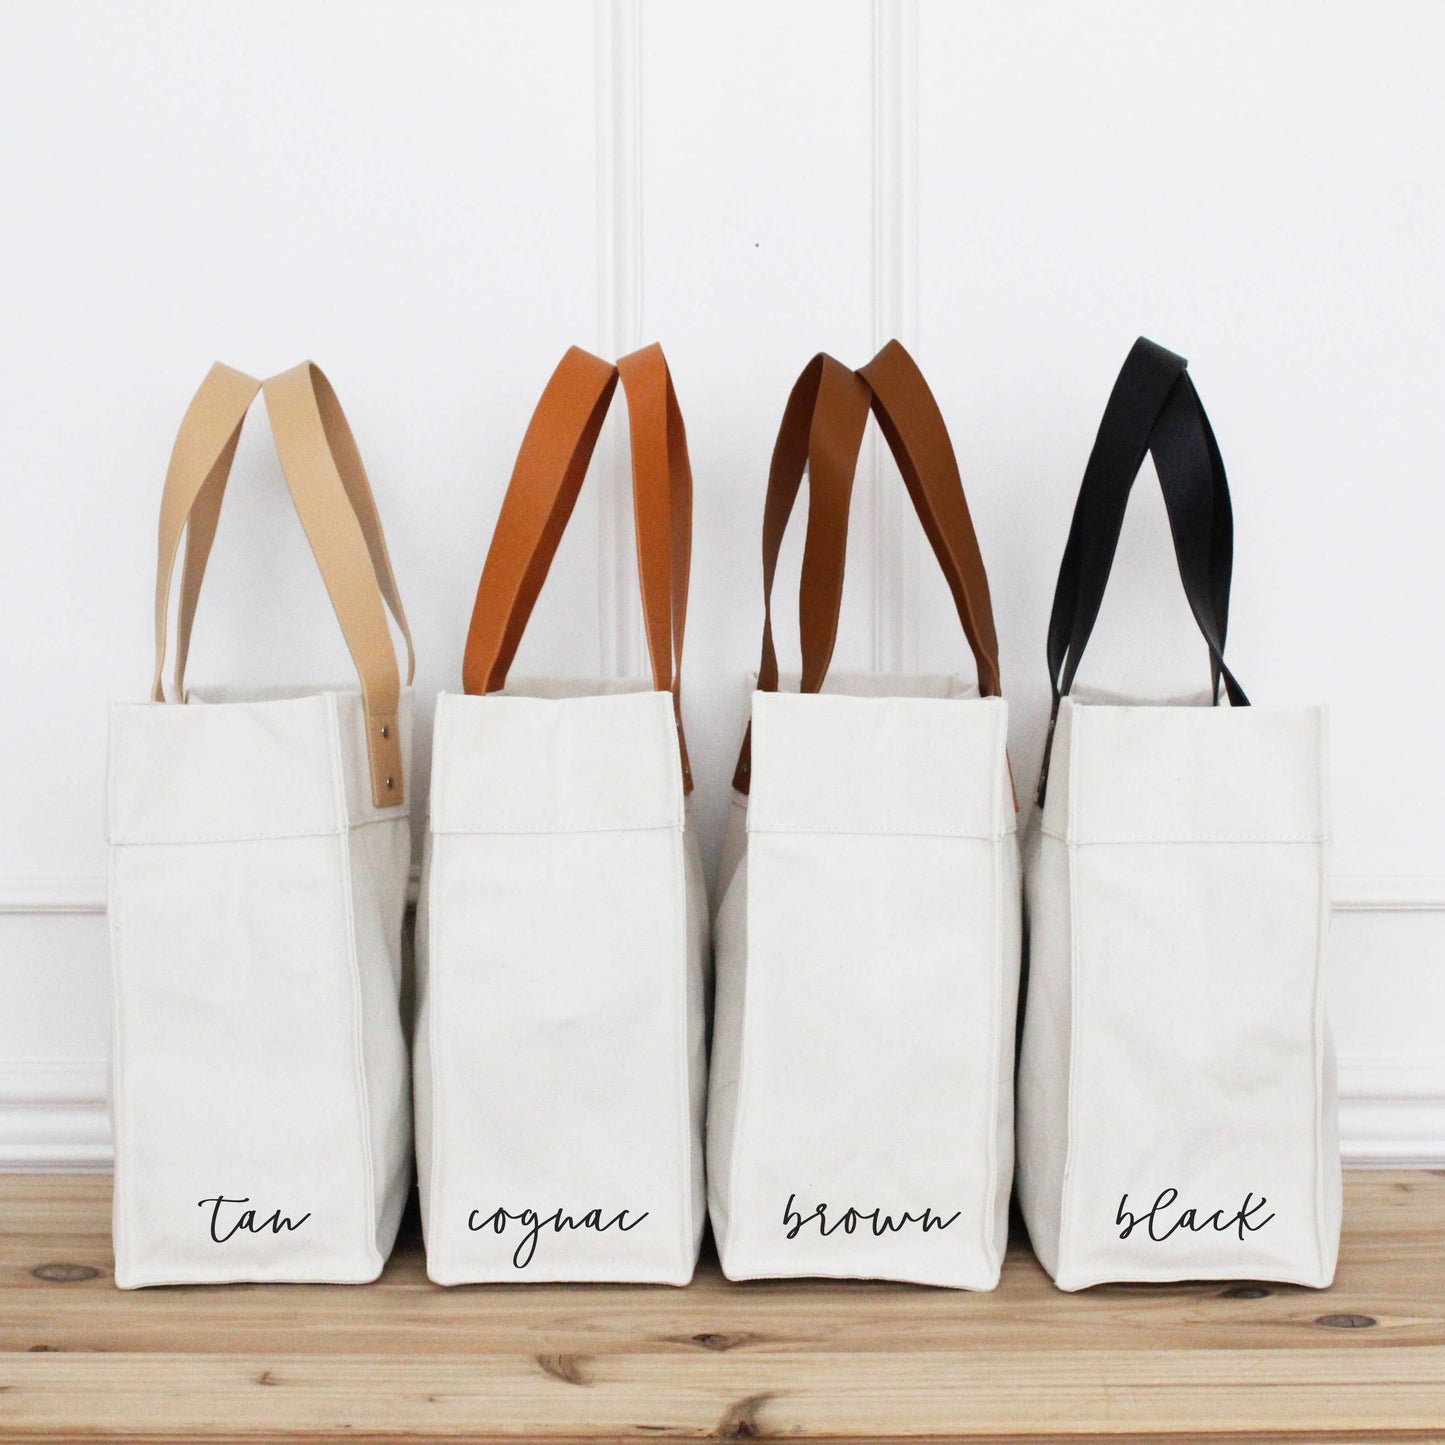 Two Things Market Tote: Black